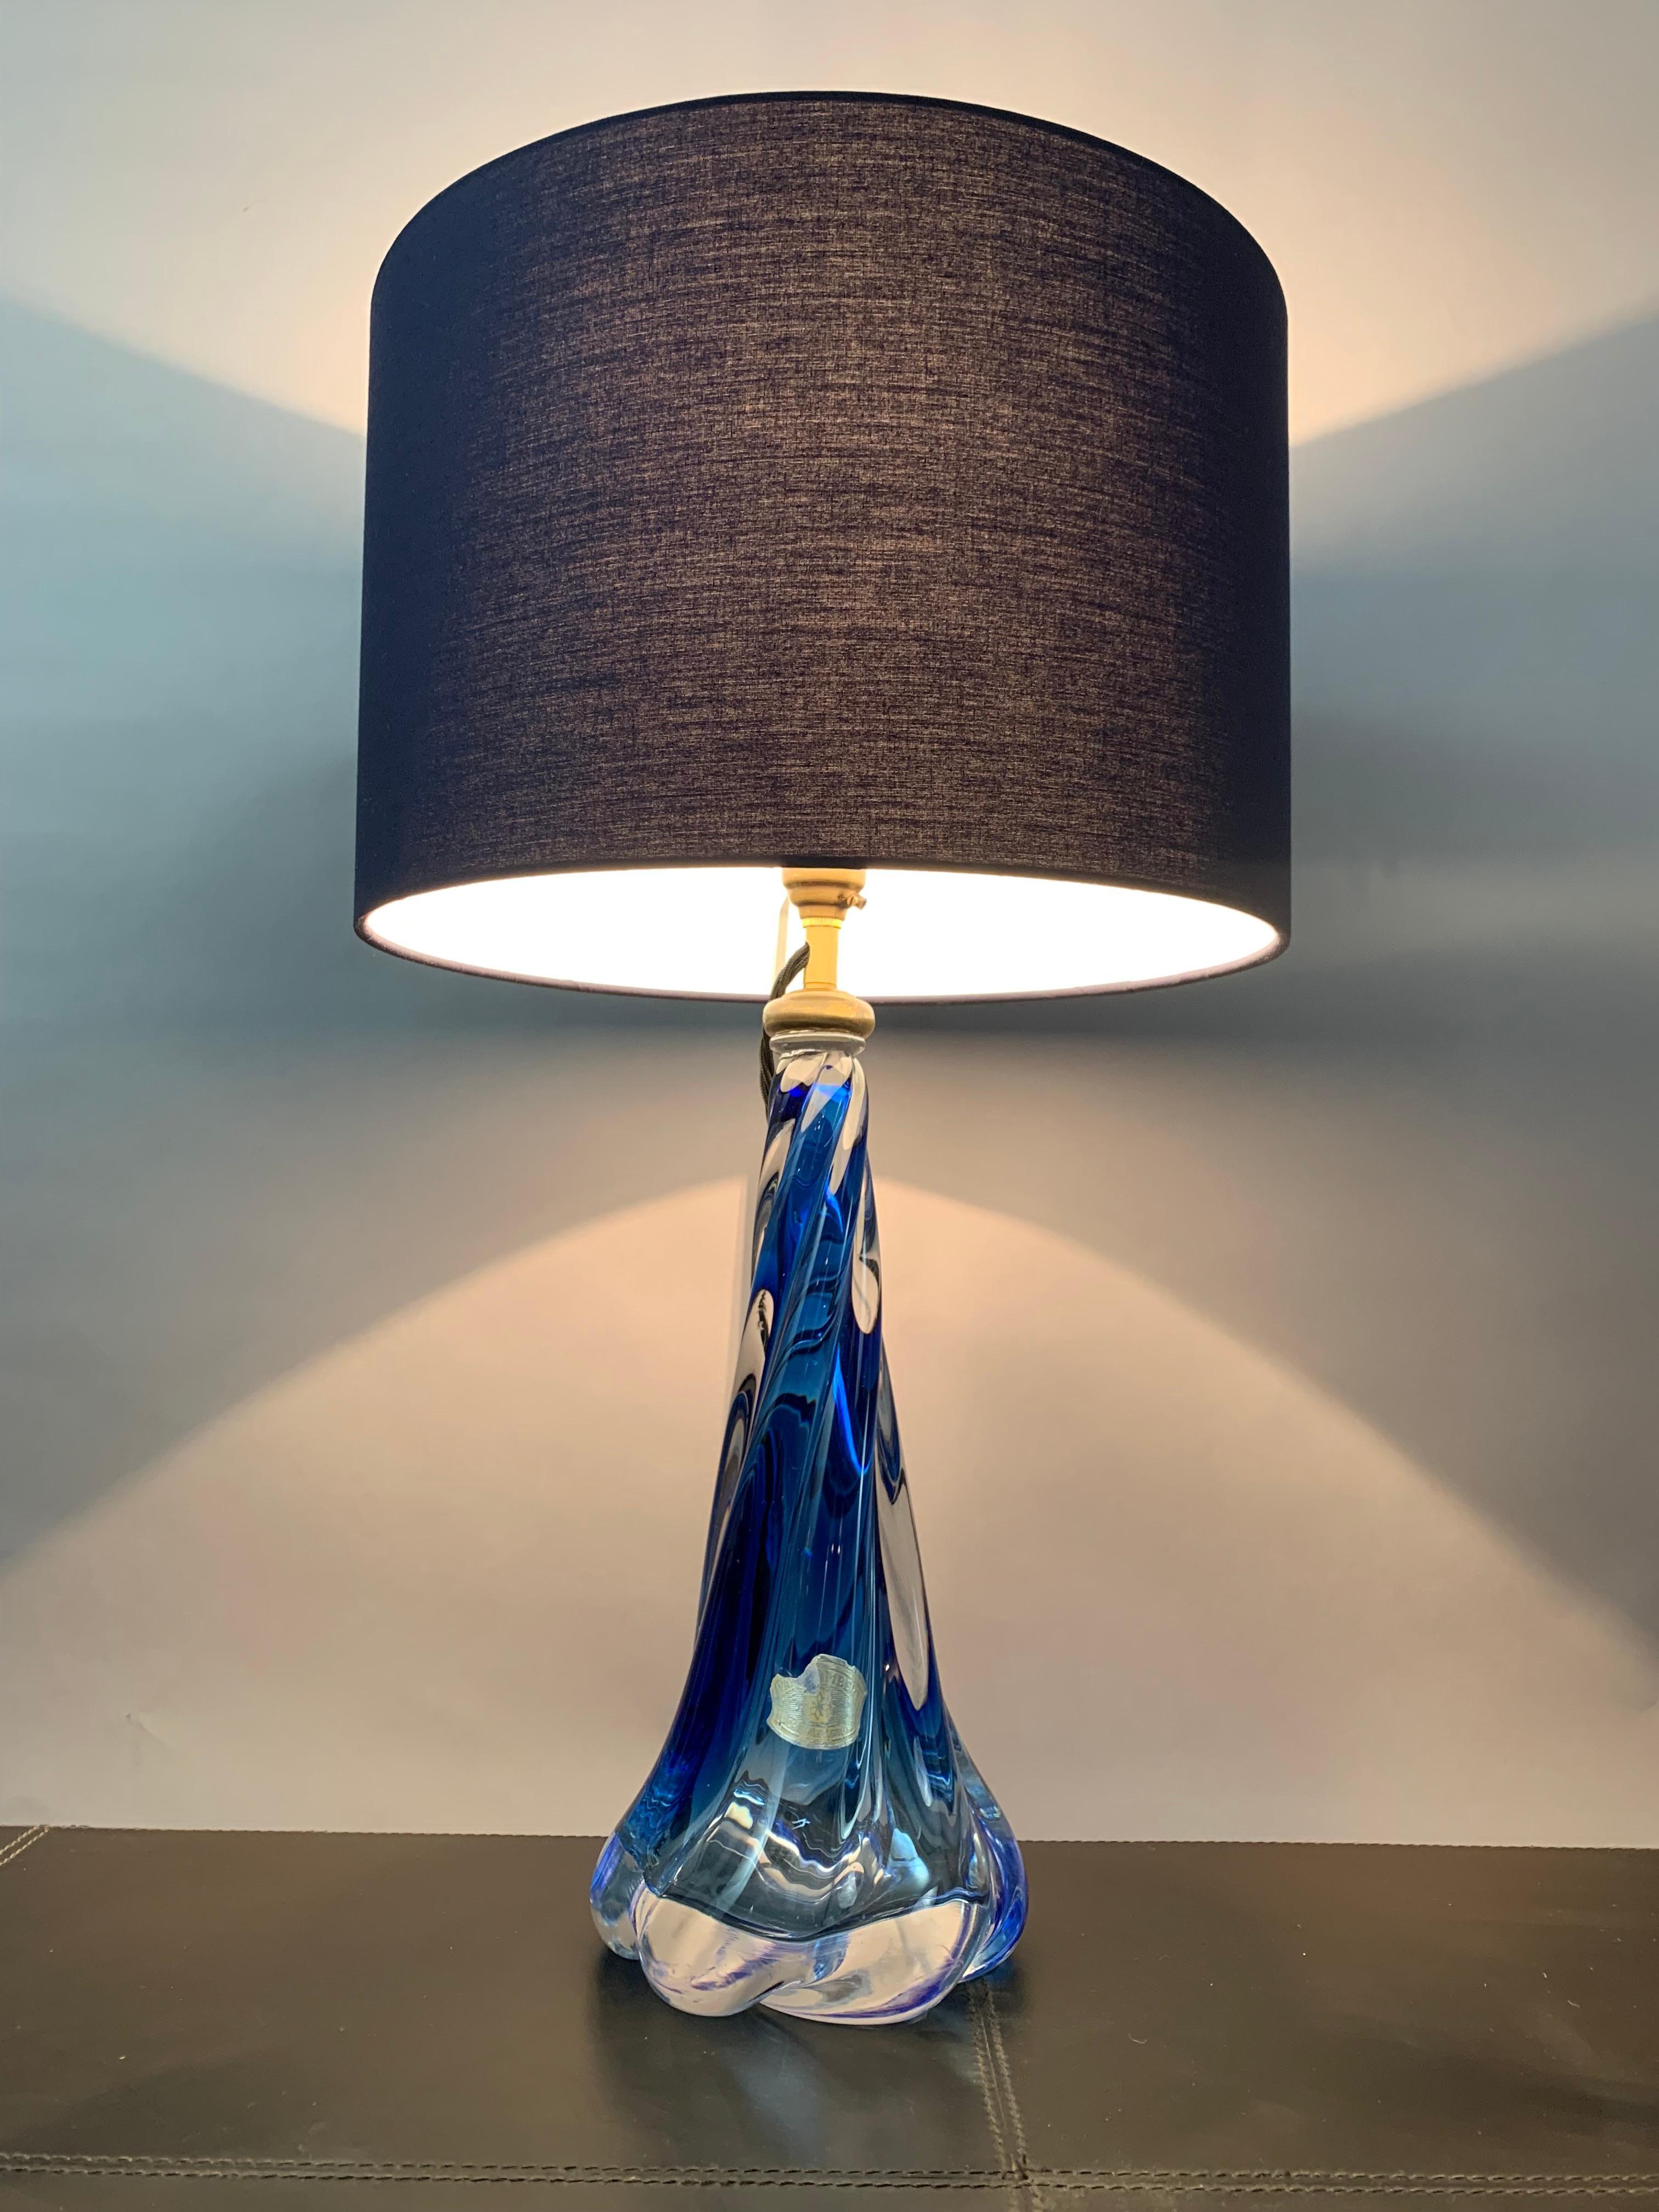 1950s Belgium Val Saint Lambert blue and clear crystal glass twisted lamp base. The lamp base fades from a deep blue at the top to become clearer towards the base. The lamp base has a beautiful flowing swirled design making it a perfect addition